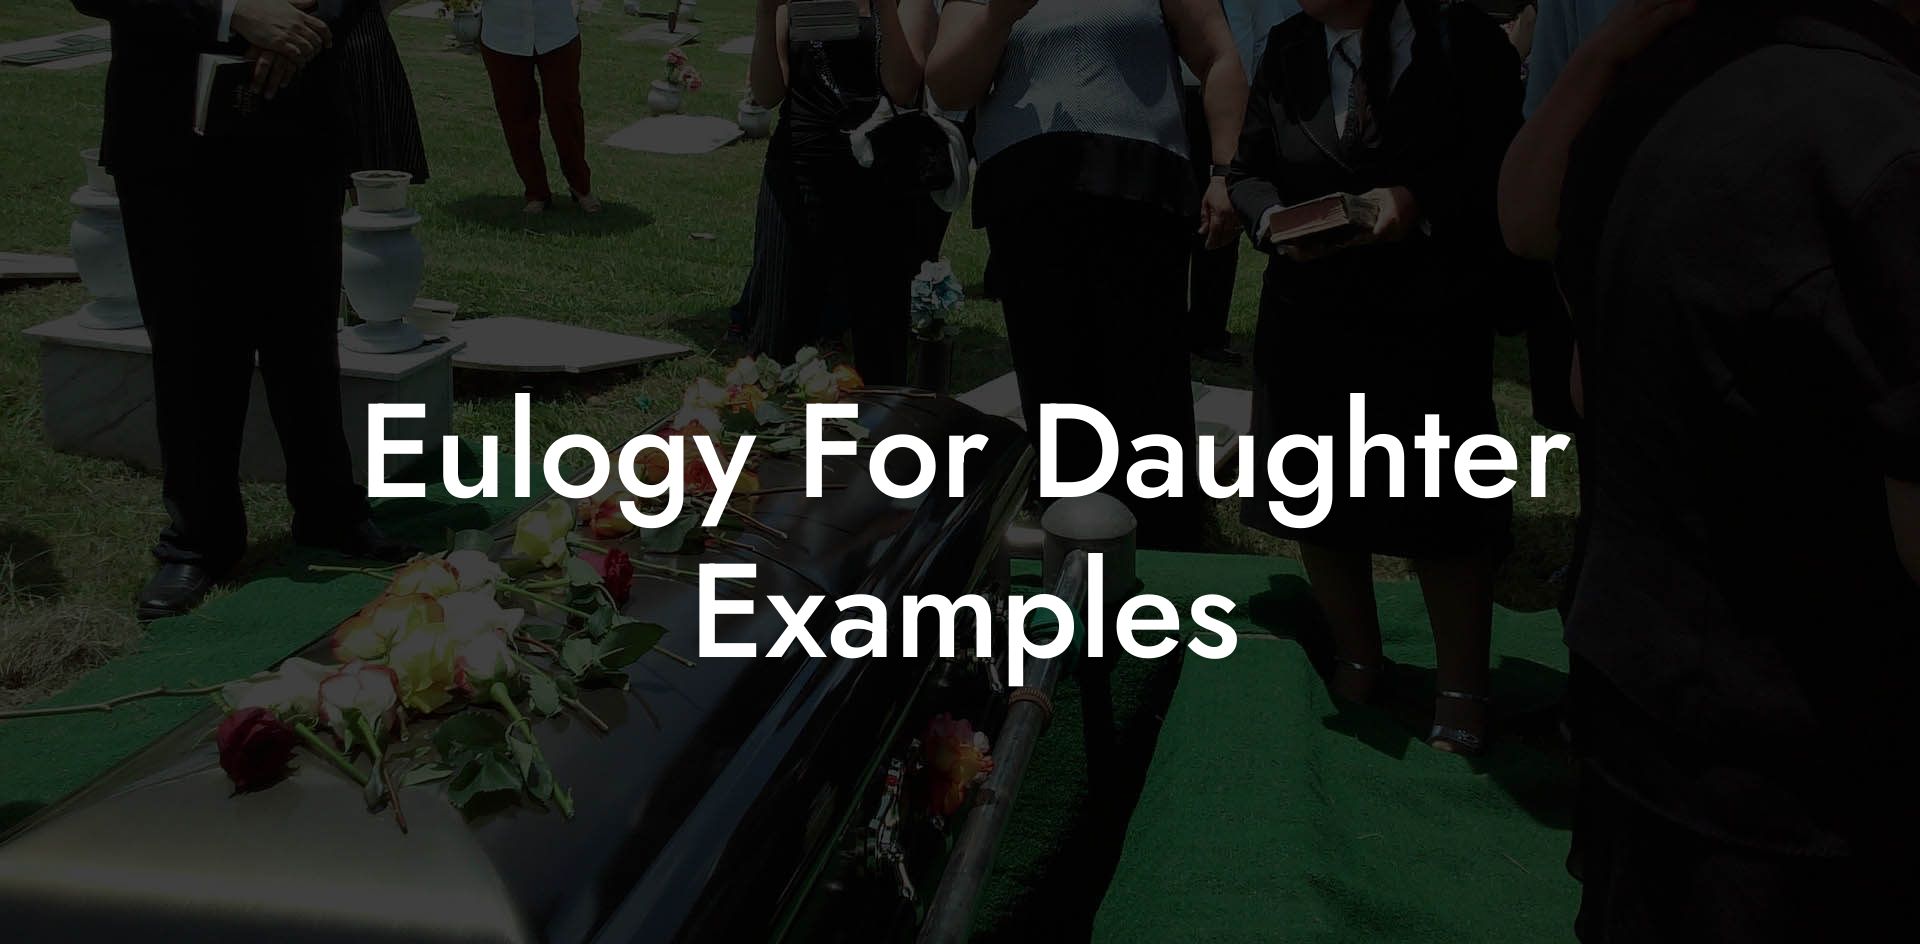 Eulogy For Daughter Examples